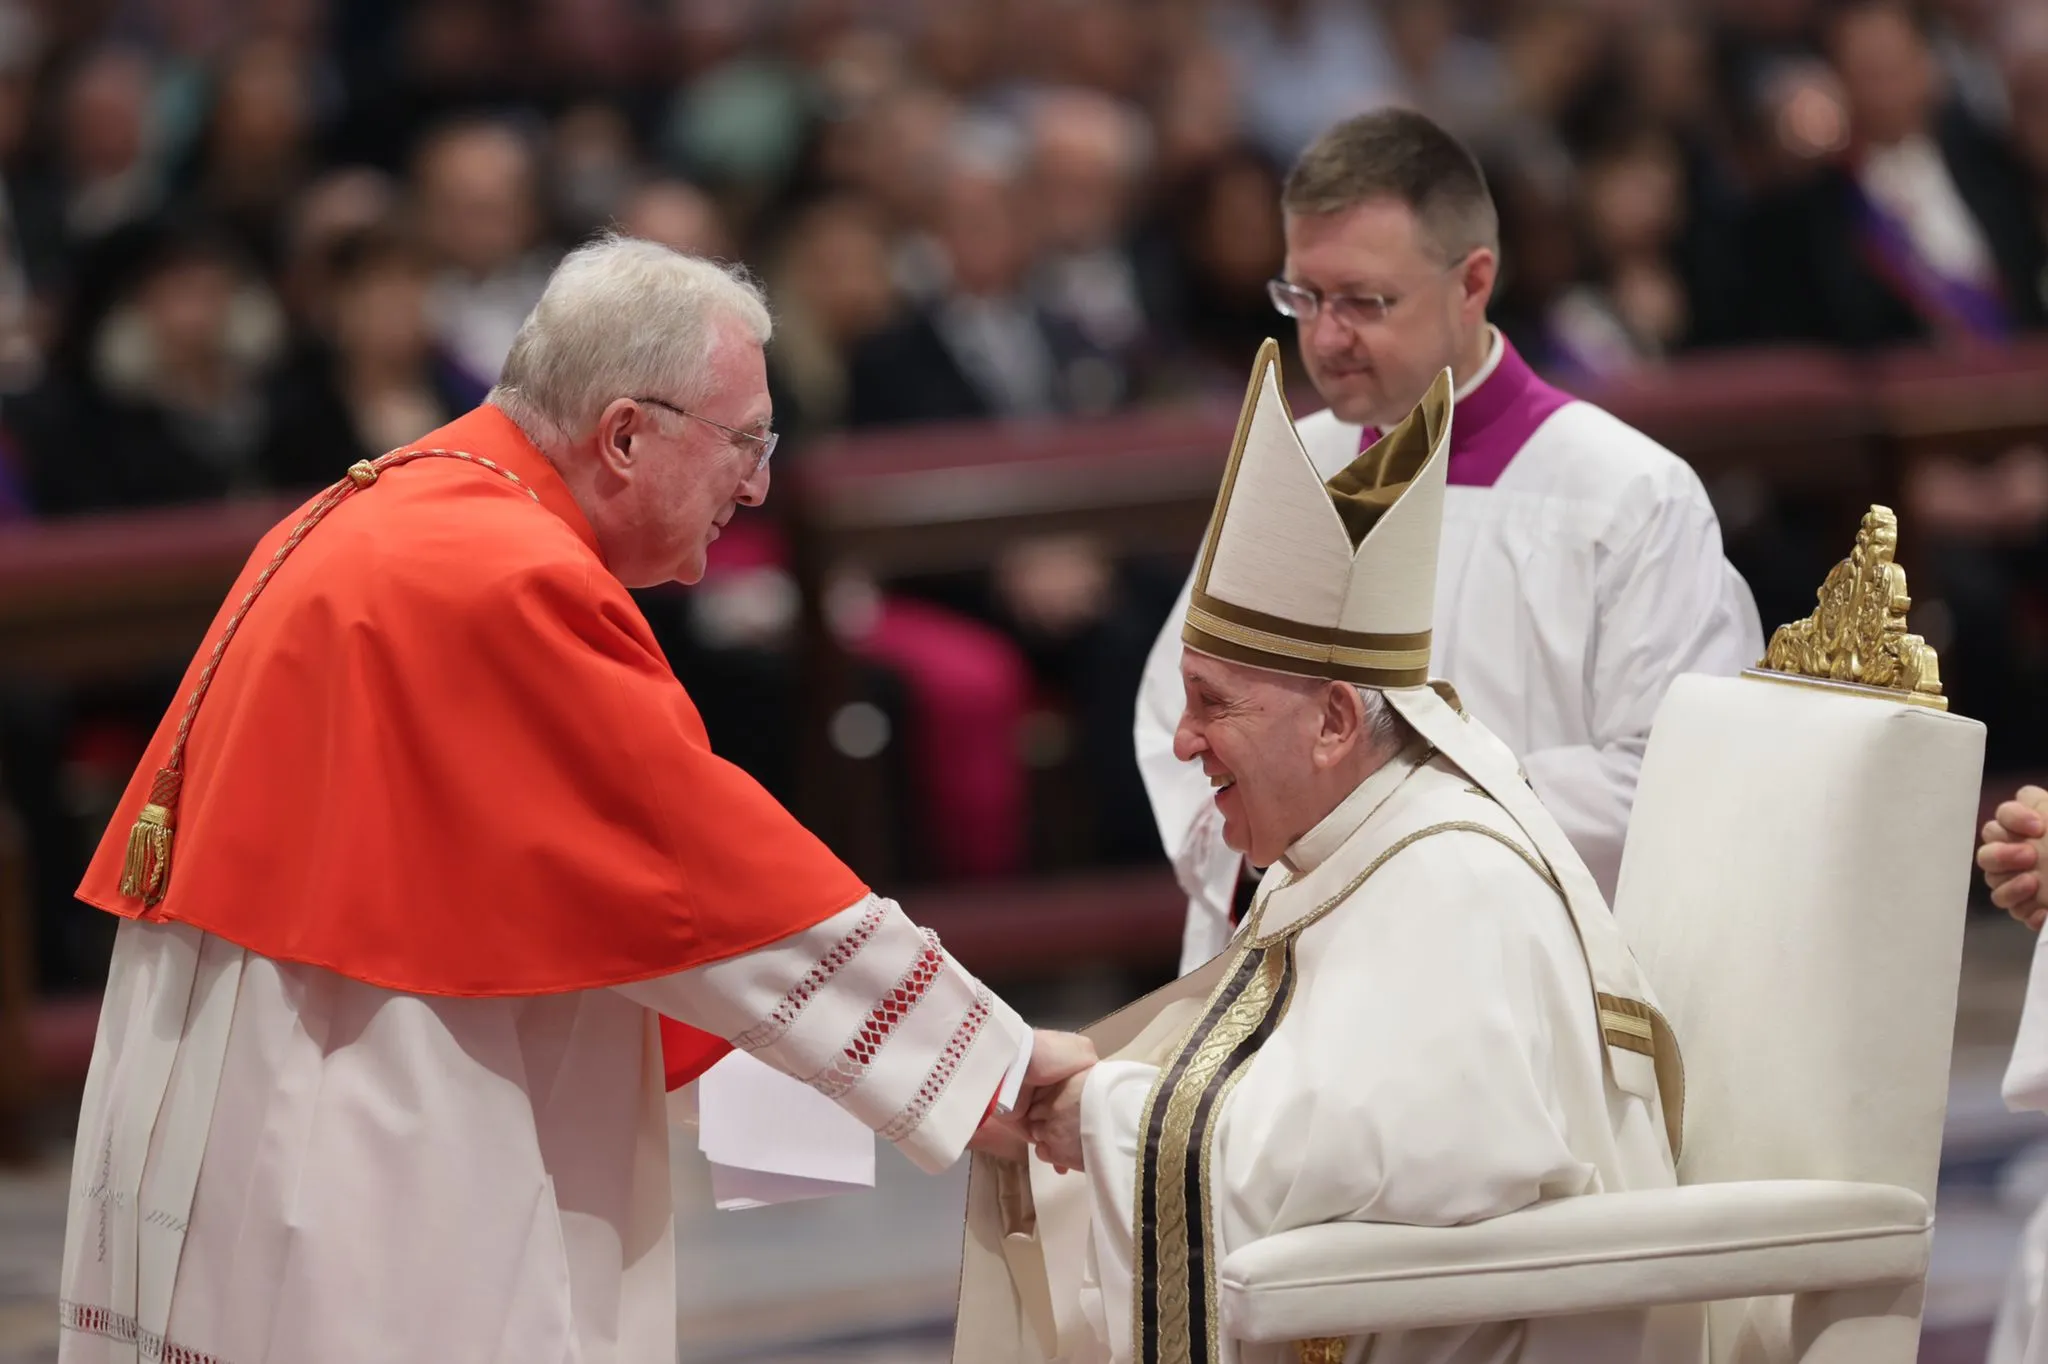 Vatican worship dicastery’s meeting to focus on proper liturgical formation, implementation